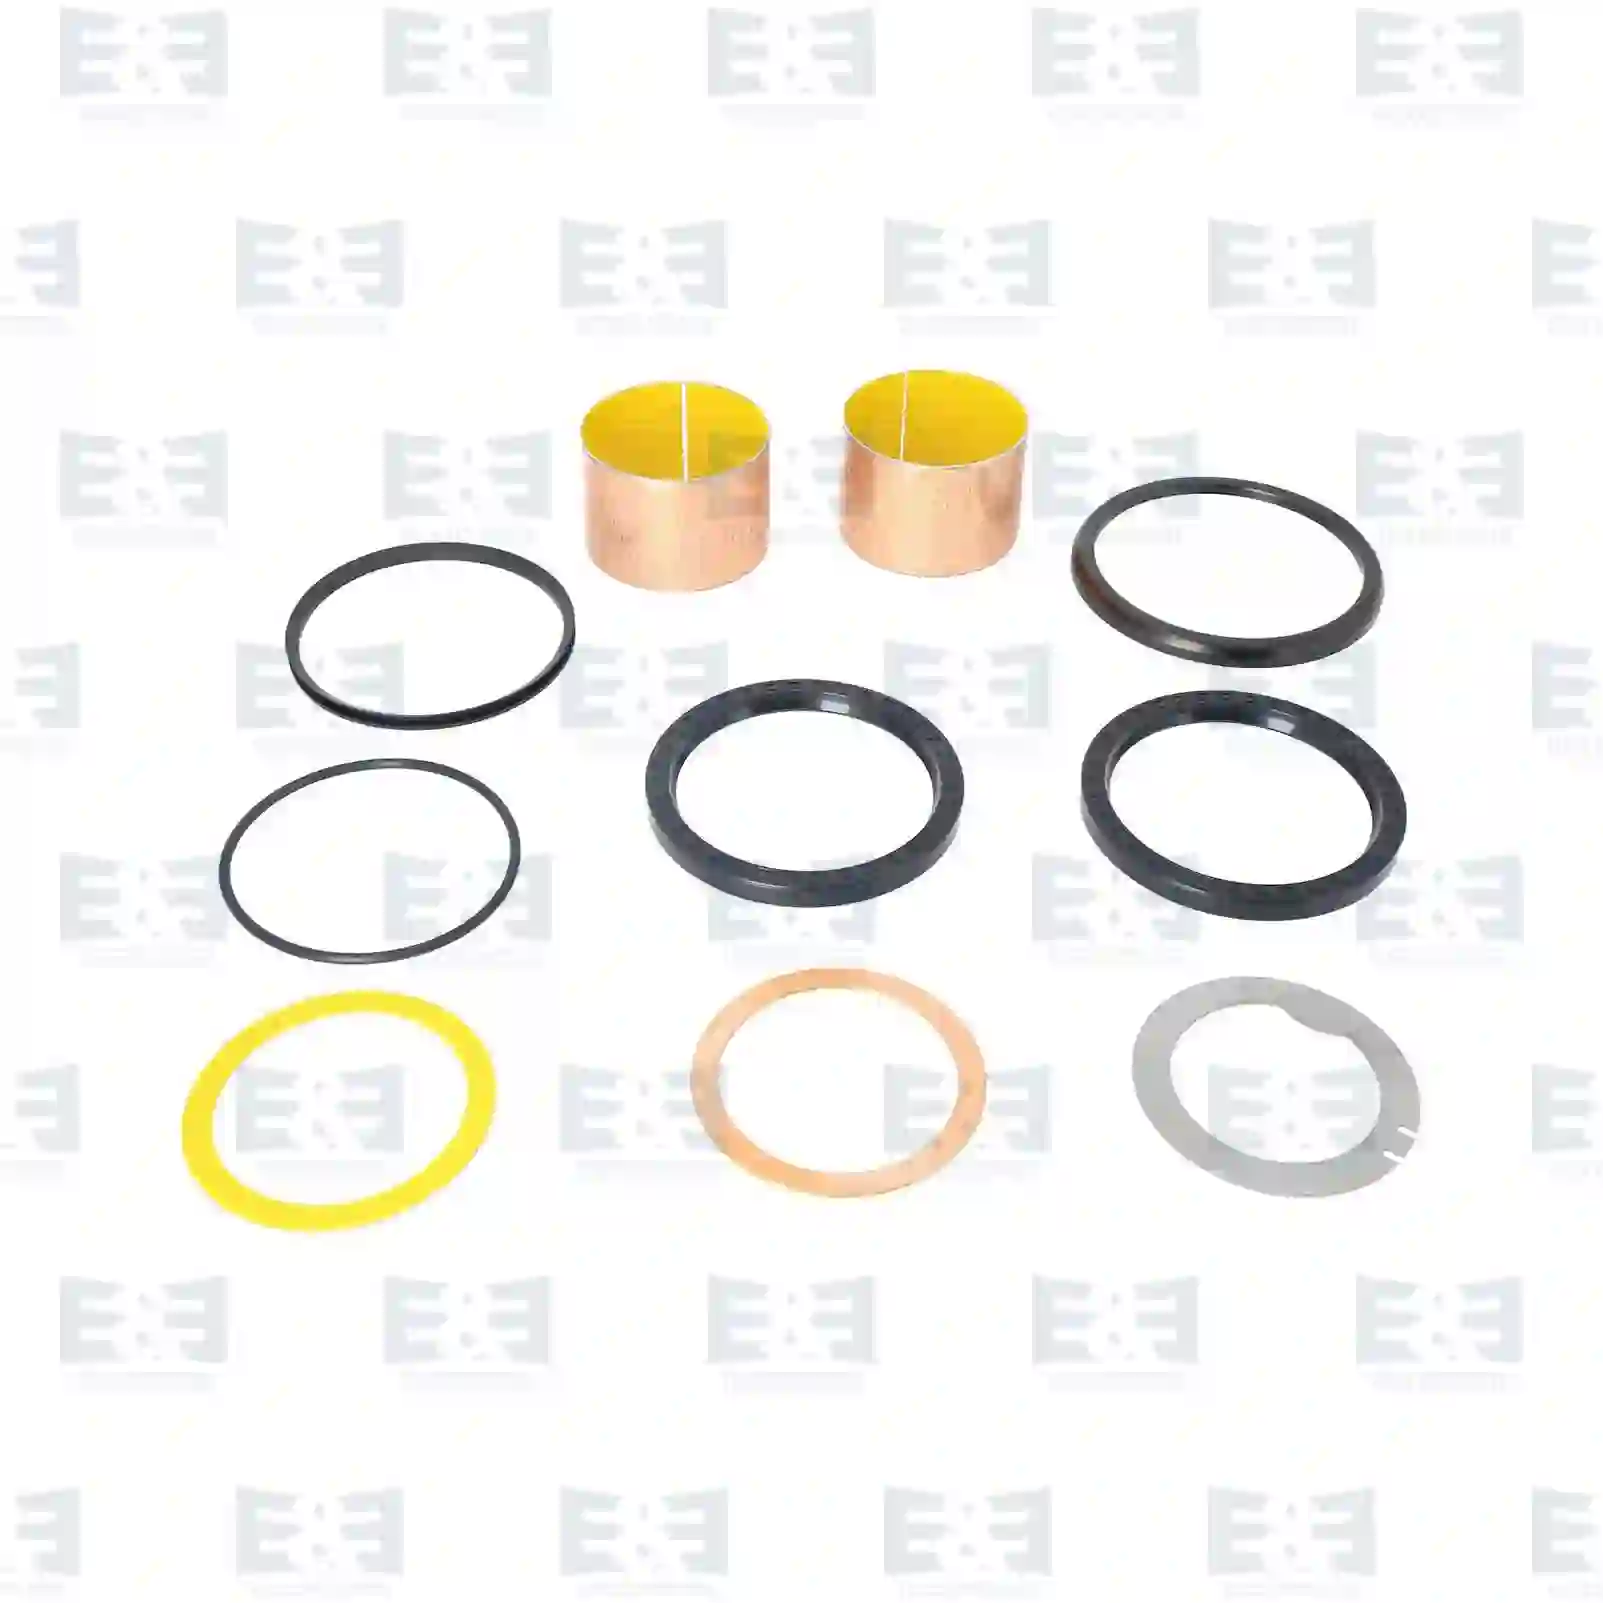  Repair kit, spring saddle, without grease nipple || E&E Truck Spare Parts | Truck Spare Parts, Auotomotive Spare Parts